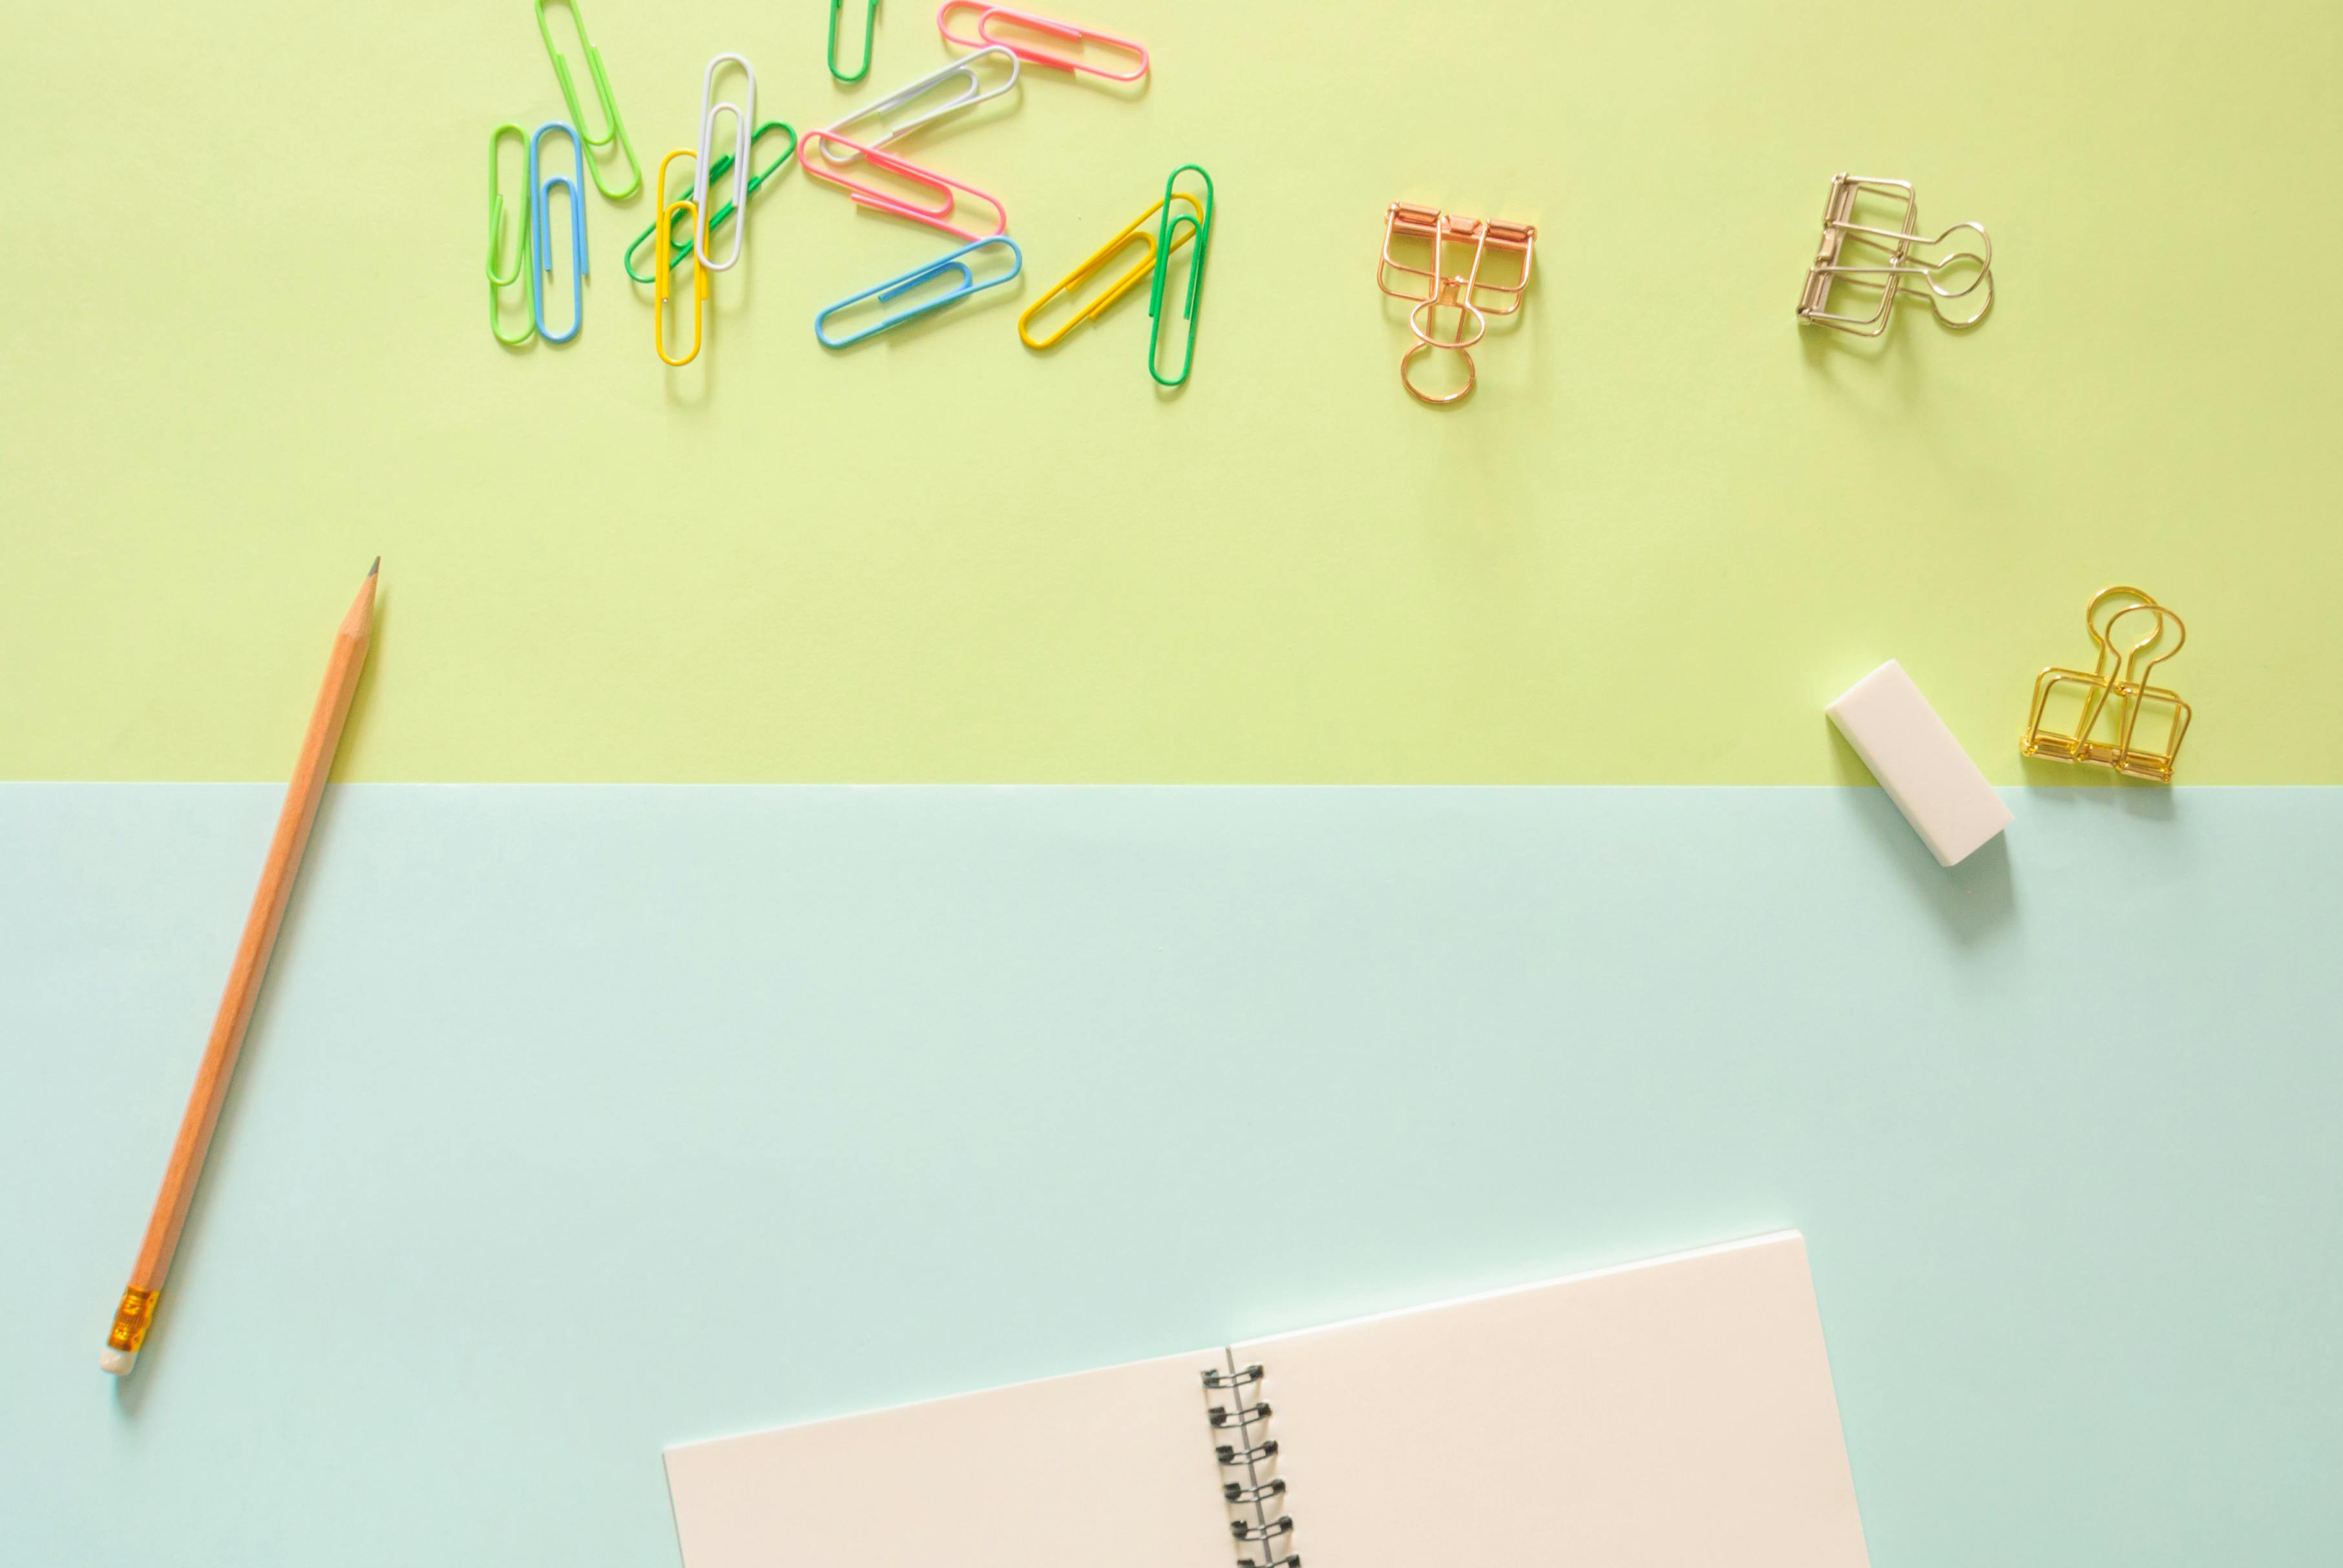 Stationery Photos Download The BEST Free Stationery Stock Photos  HD  Images